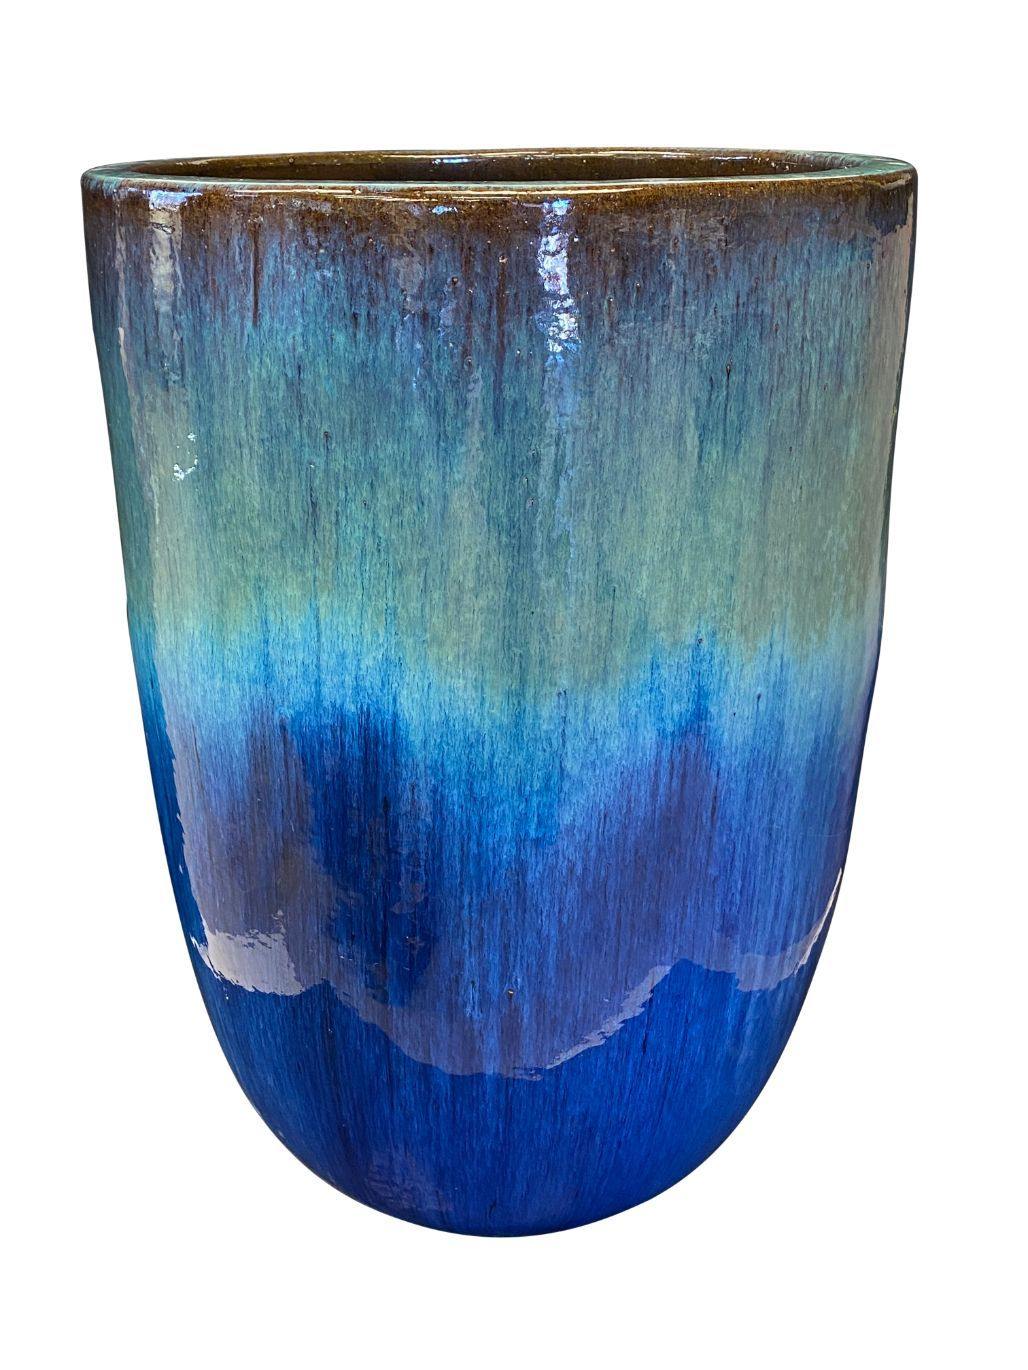 Image of a blue and brown modern cylinder planter.